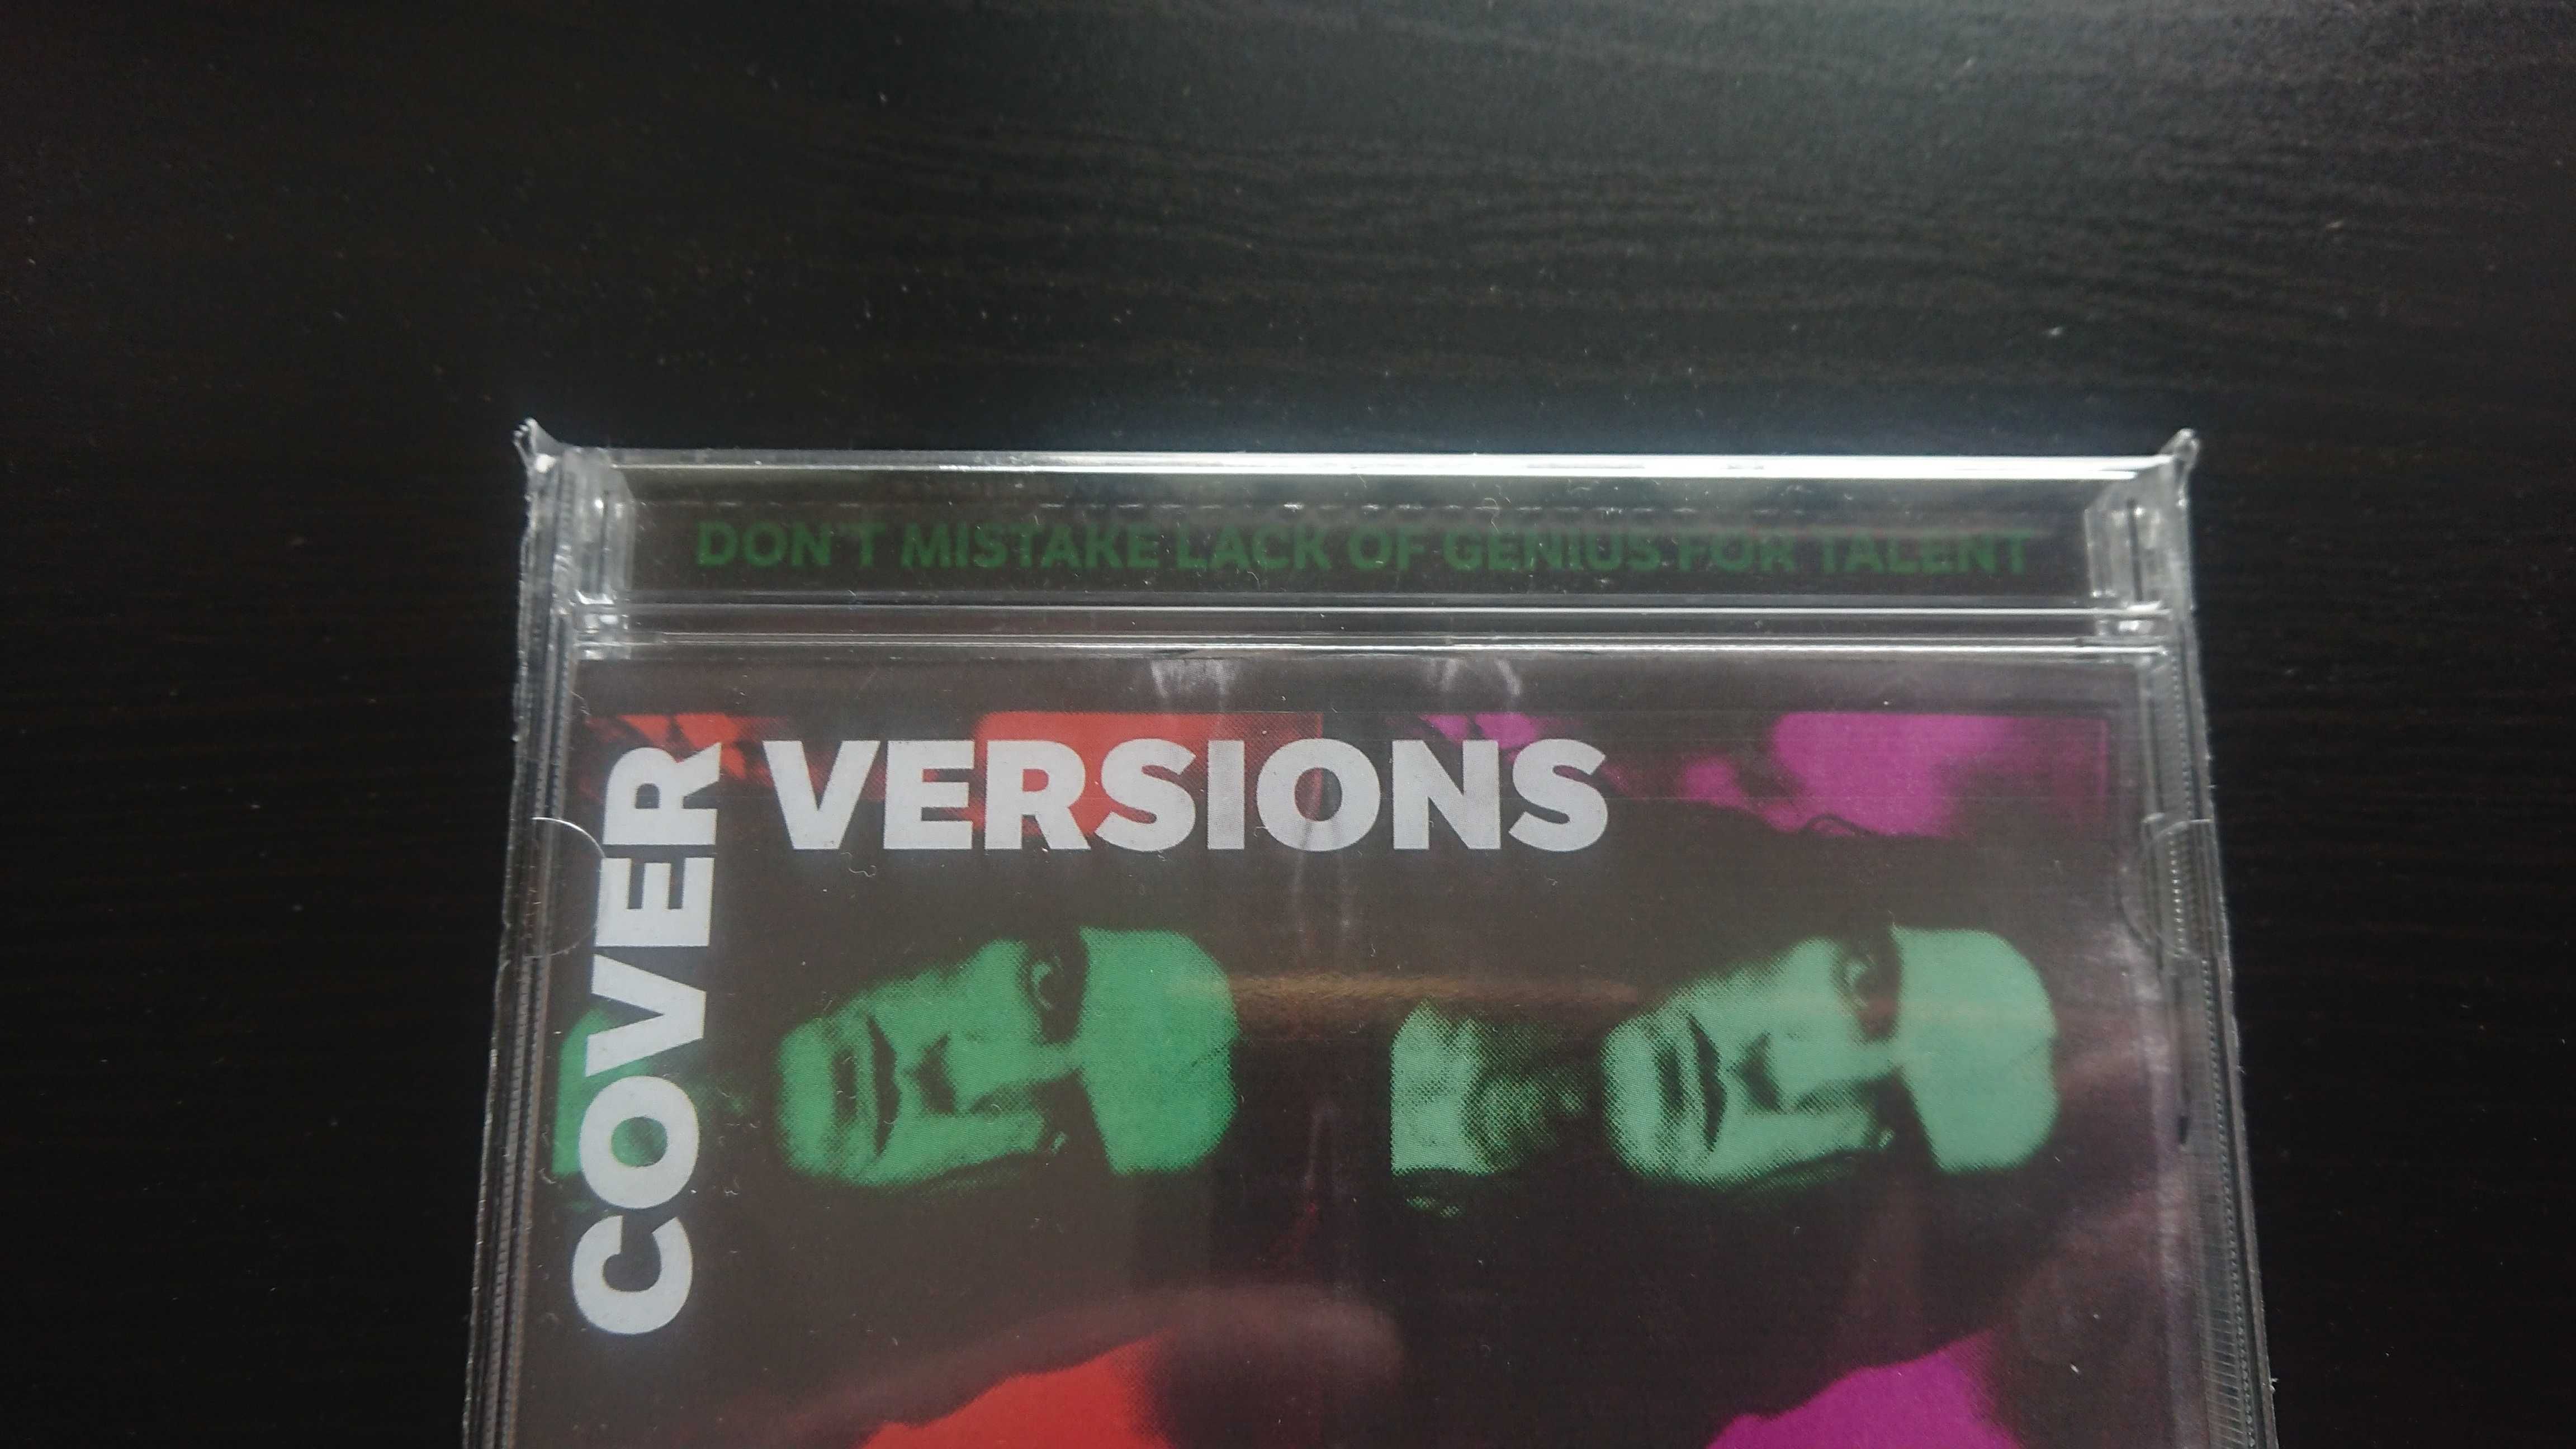 Type O Negative Cover Versions CD *NOWA* Limited 500 Copies Folia 2019